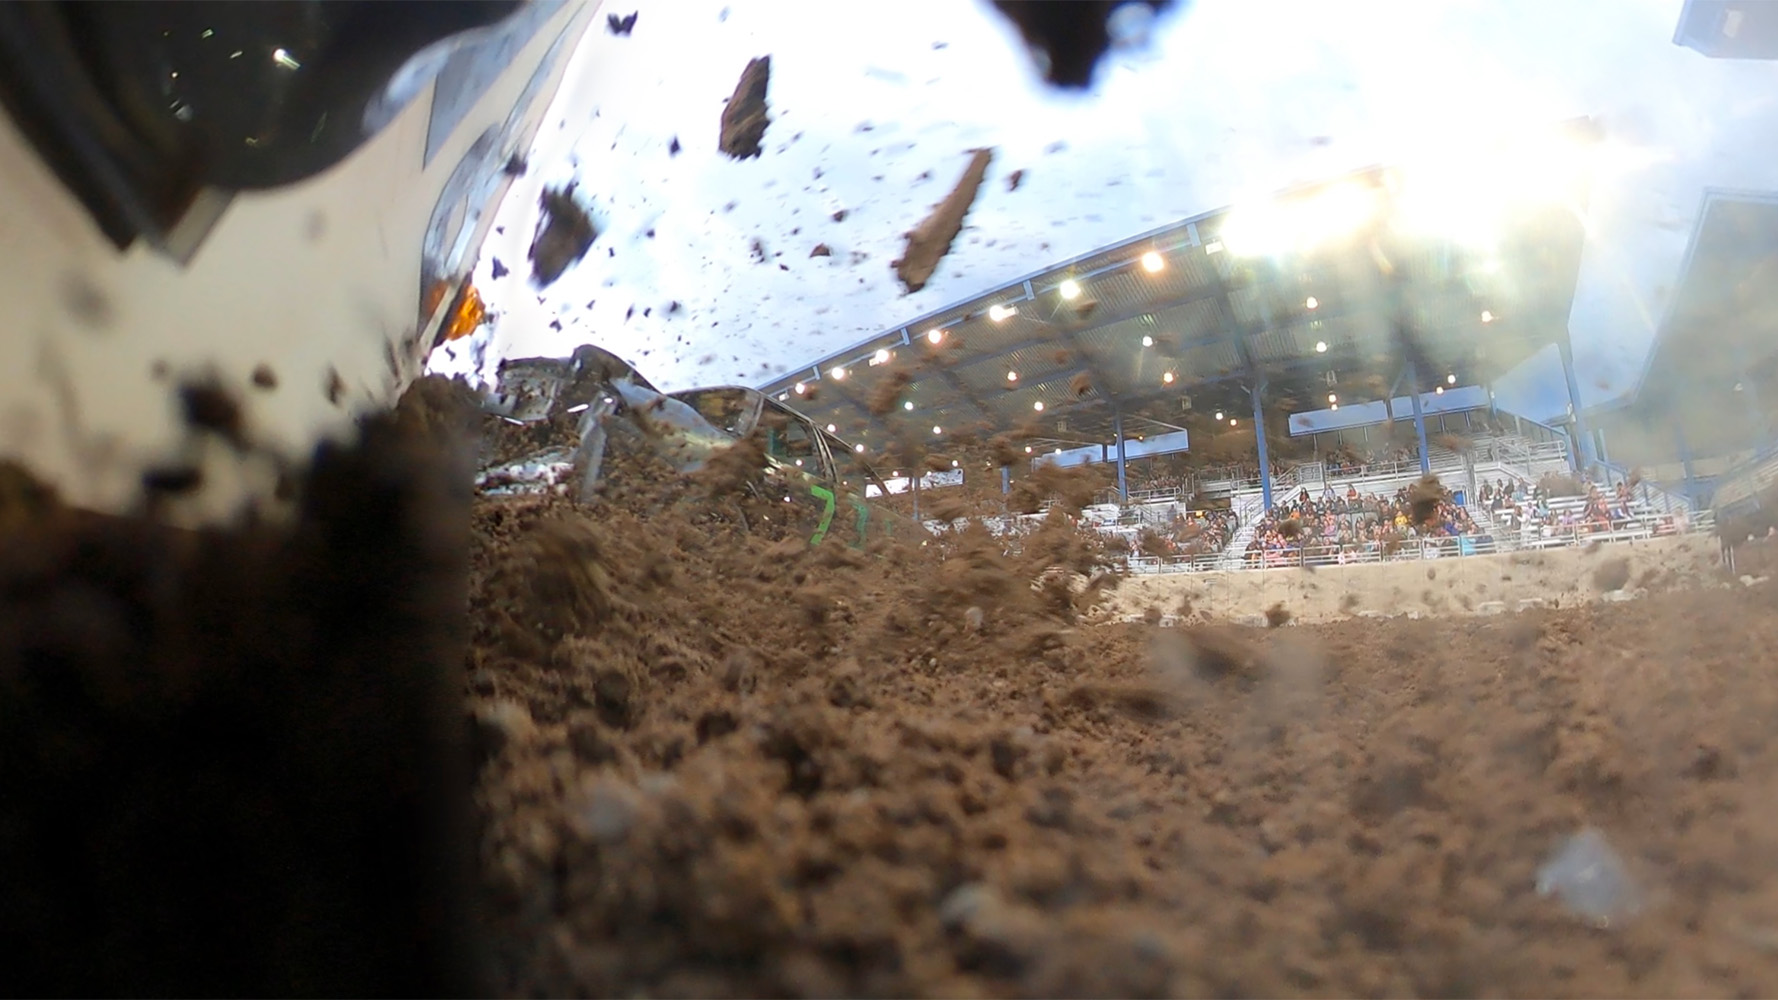 GoPro down at the race track